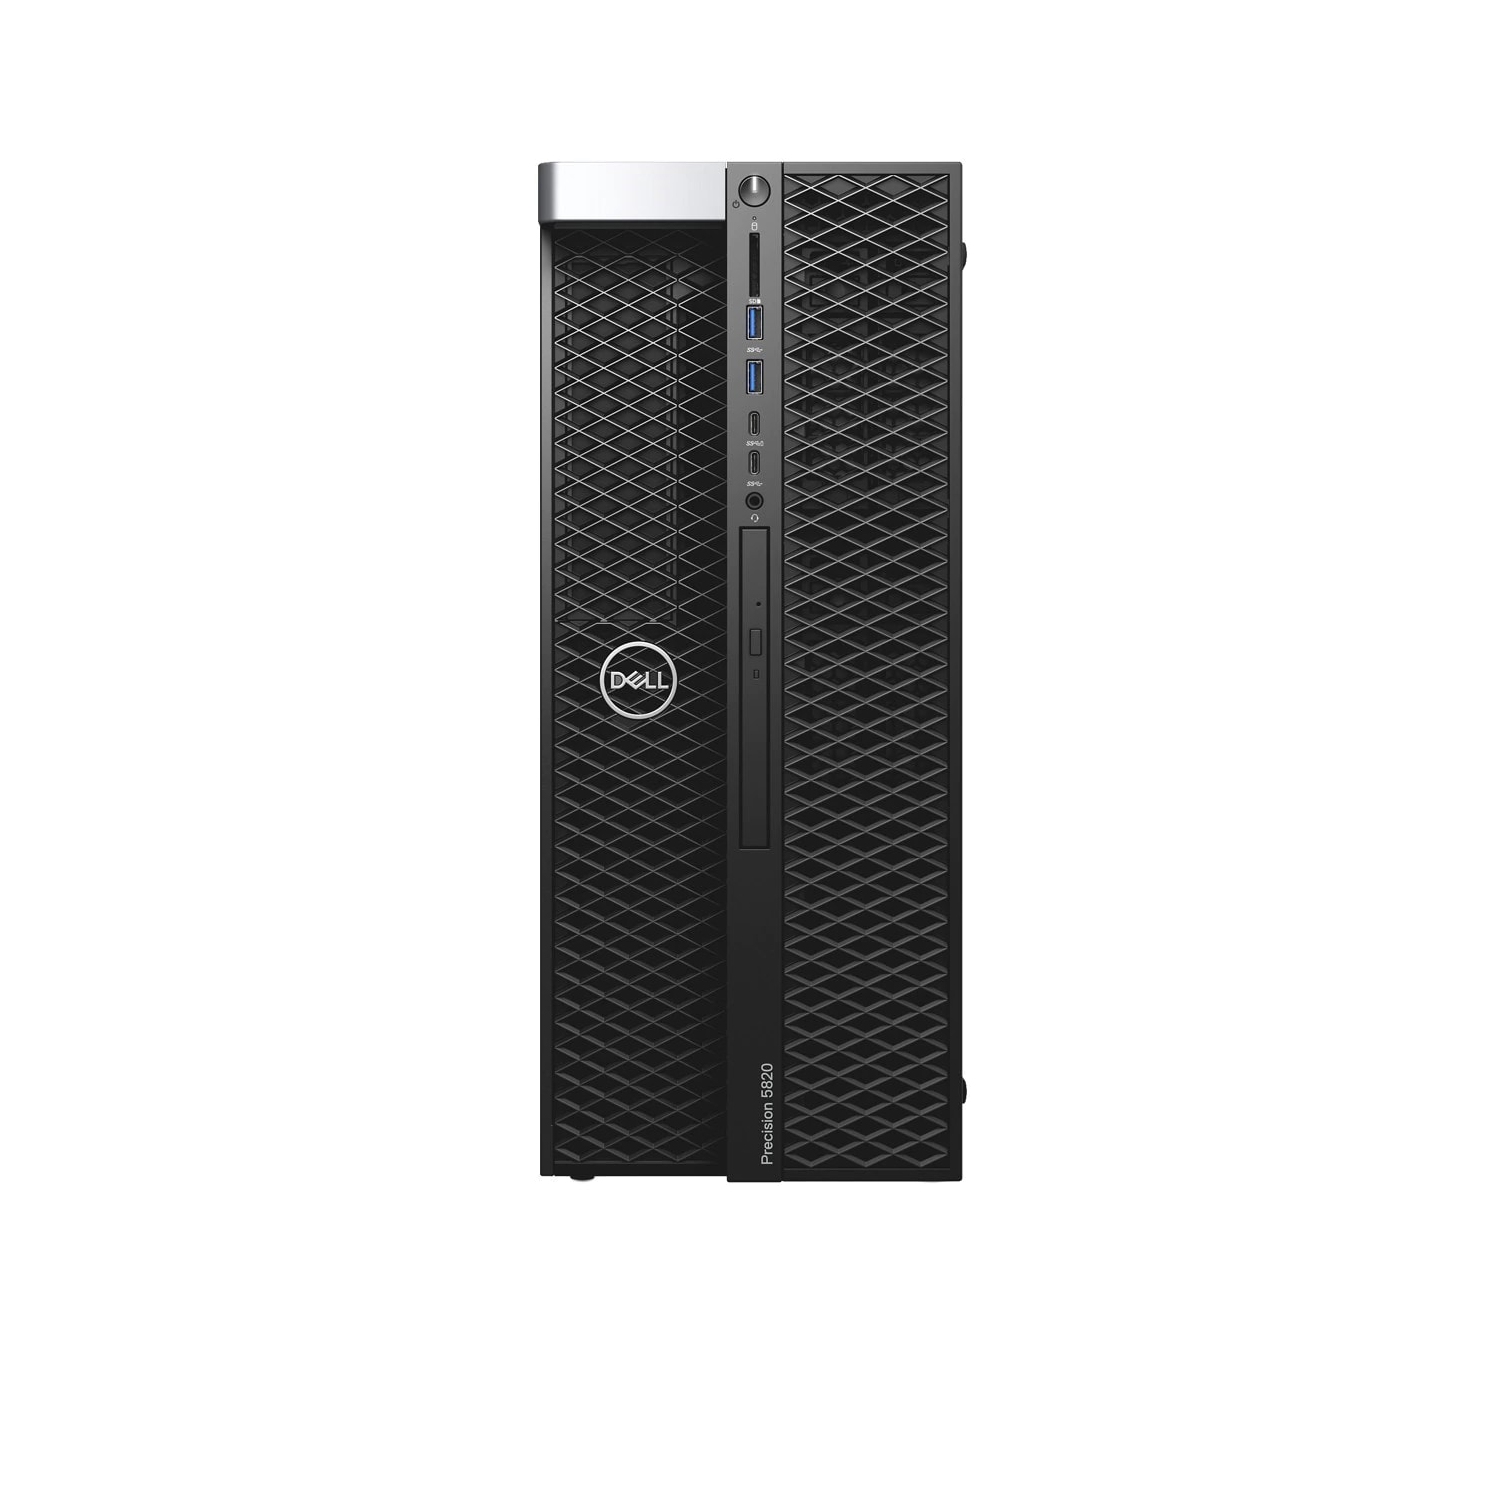 Refurbished (Excellent) - Dell Precision T5820 Workstation Desktop (2018), Core i9, 2TB HDD, 64GB RAM, RTX 3090, 10 Cores @ 4.5 GHz, 10th Gen CPU Certified Refurbished